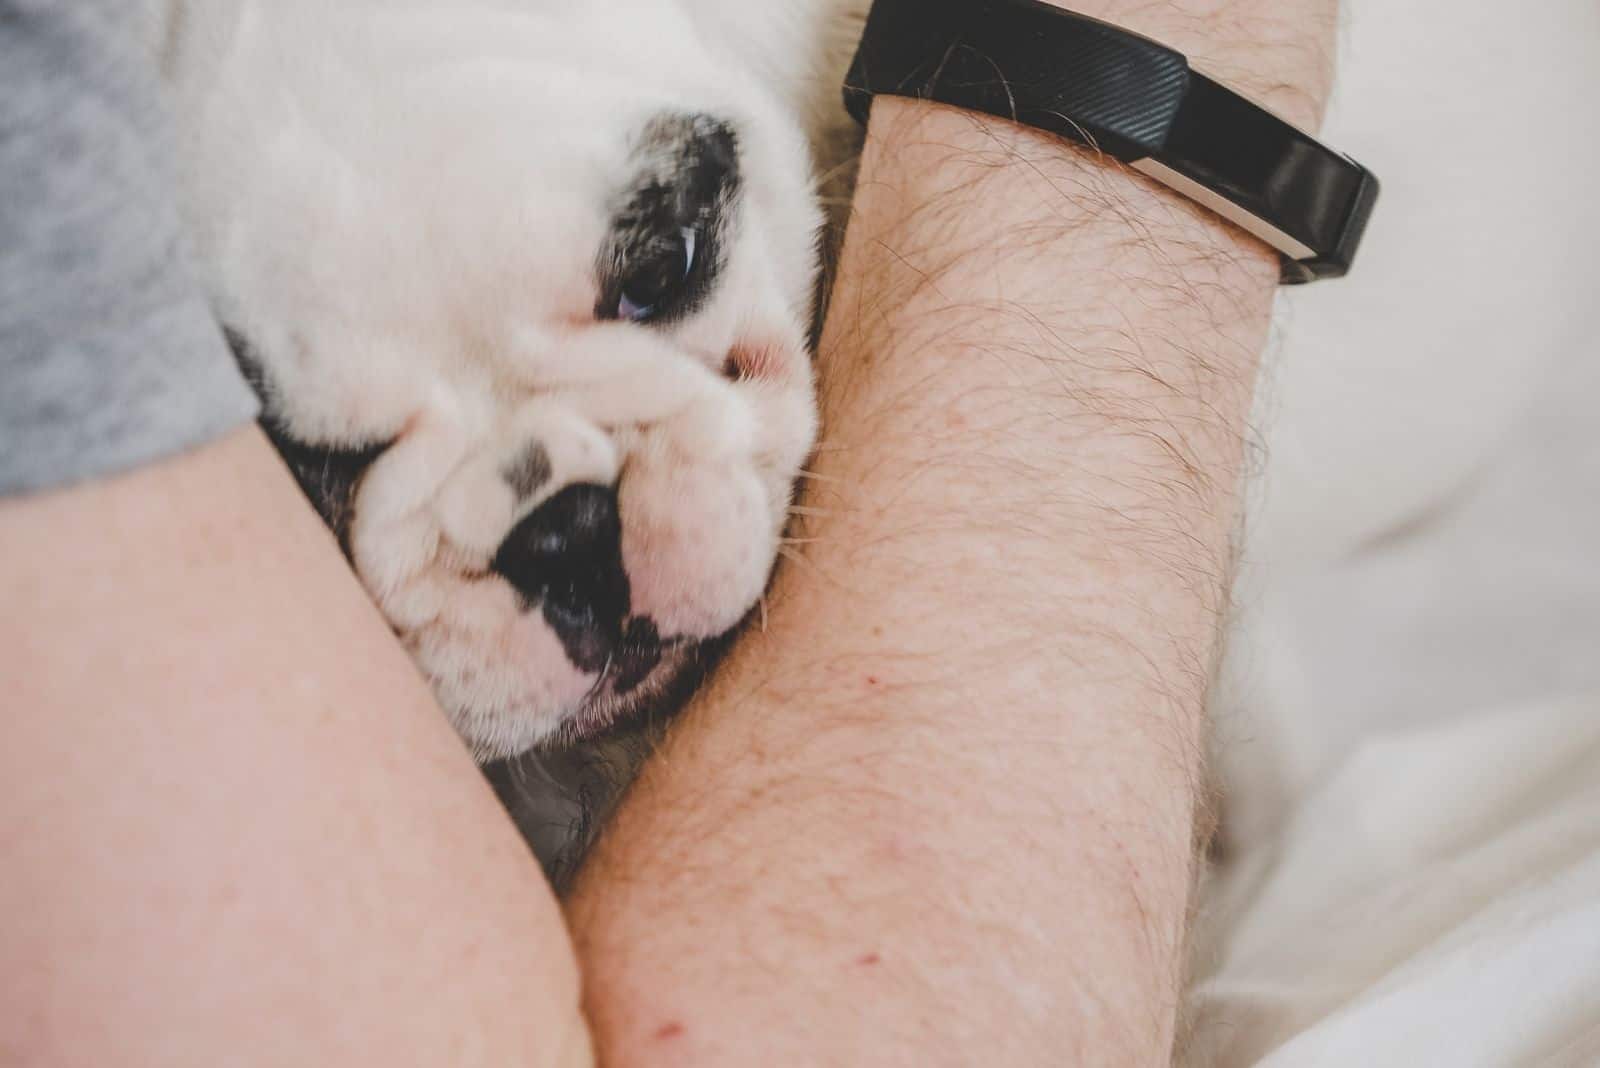 man cuddling a french bulldog puppy in close up photography